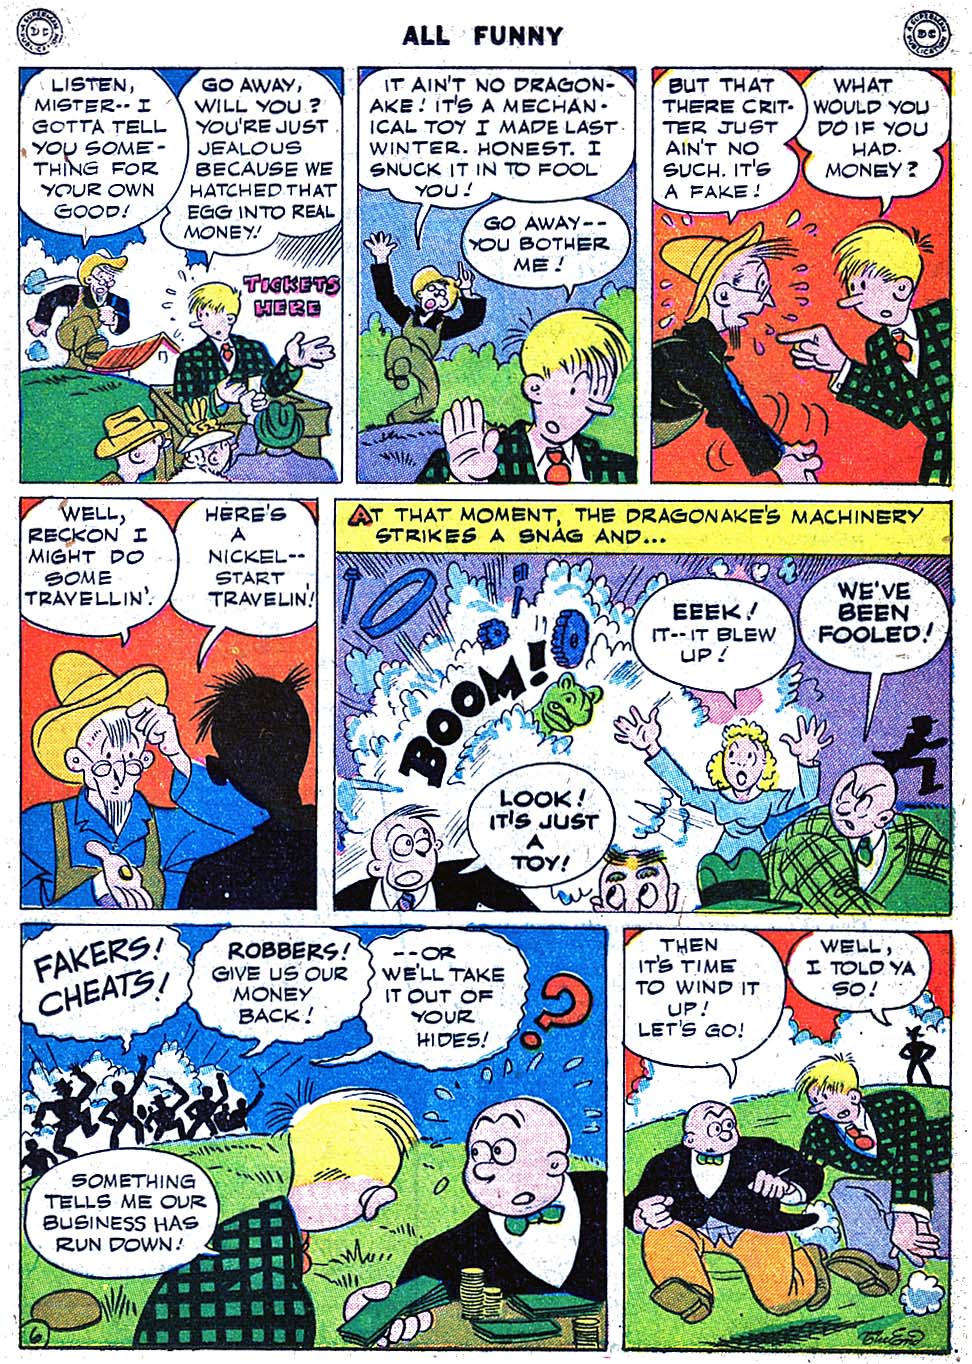 Read online All Funny Comics comic -  Issue #6 - 25